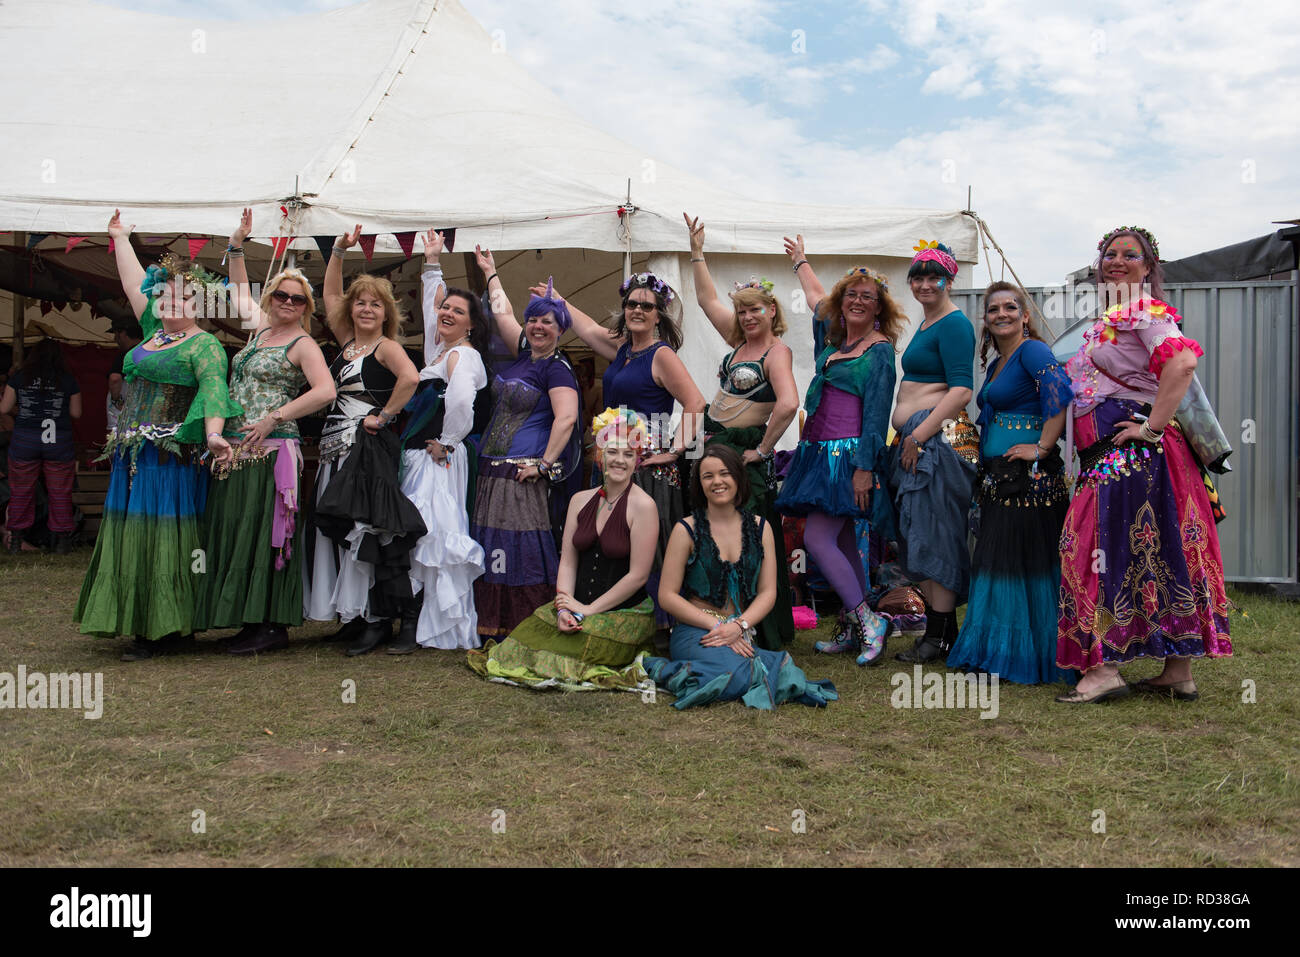 Belly dancers posing outside a marquee at a music festival Stock Photo